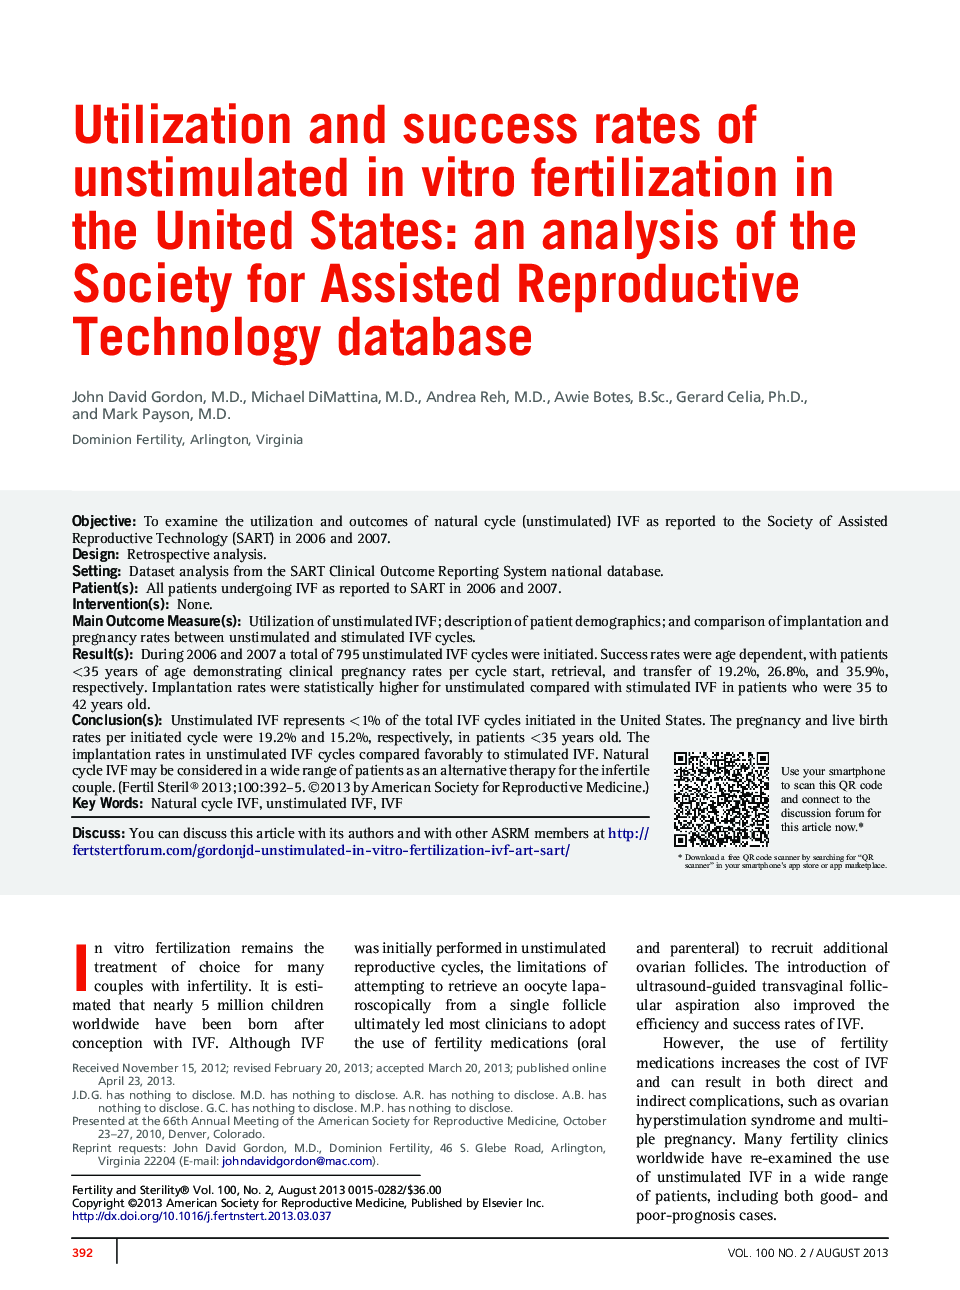 Utilization and success rates of unstimulated in vitro fertilization in the United States: an analysis of the Society for Assisted Reproductive Technology database 